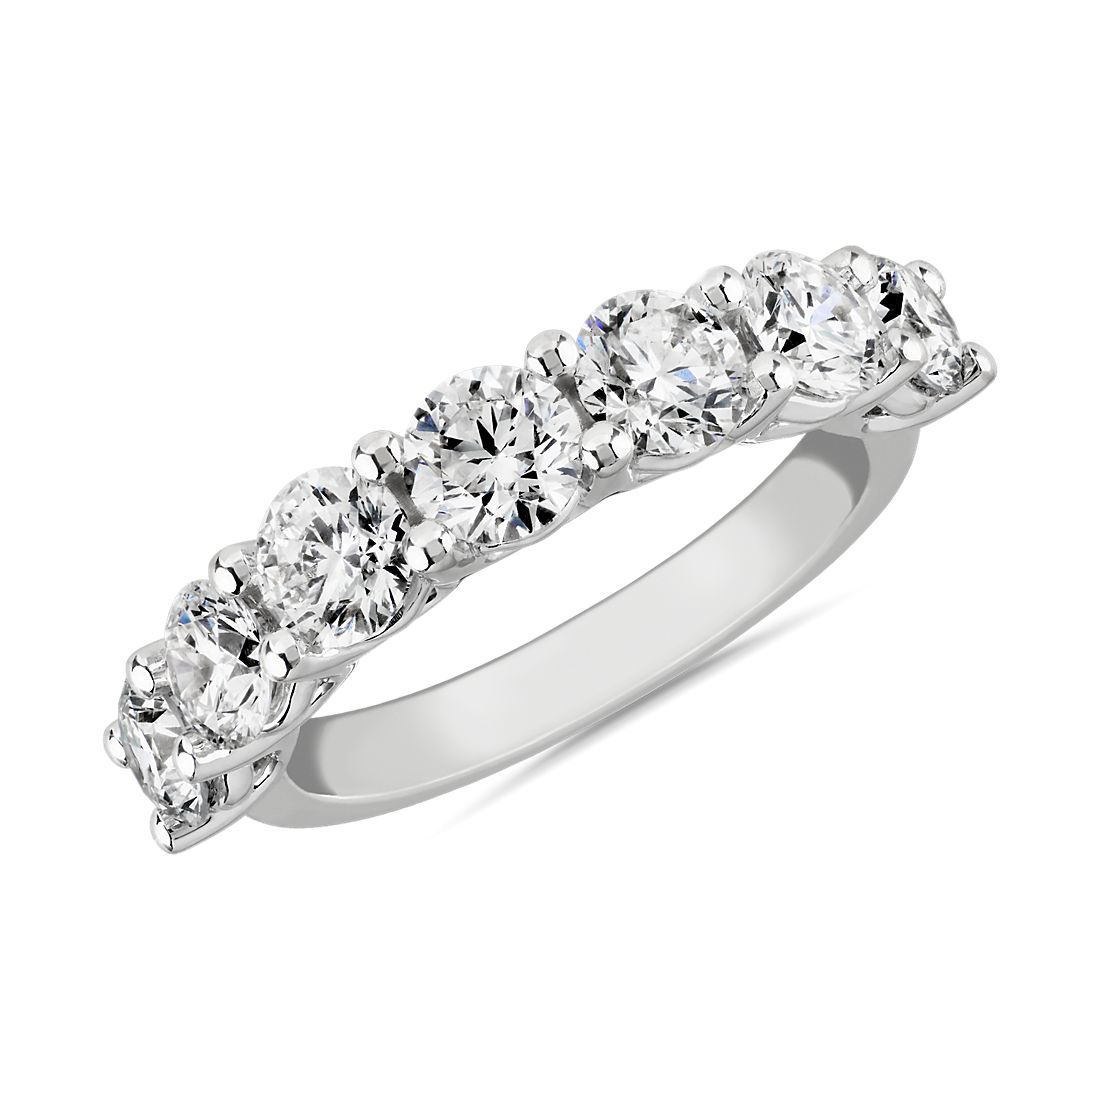 Lab Grown Diamond Low Dome Seven Stone Ring in 14k White Gold (1.96 ct. tw.)